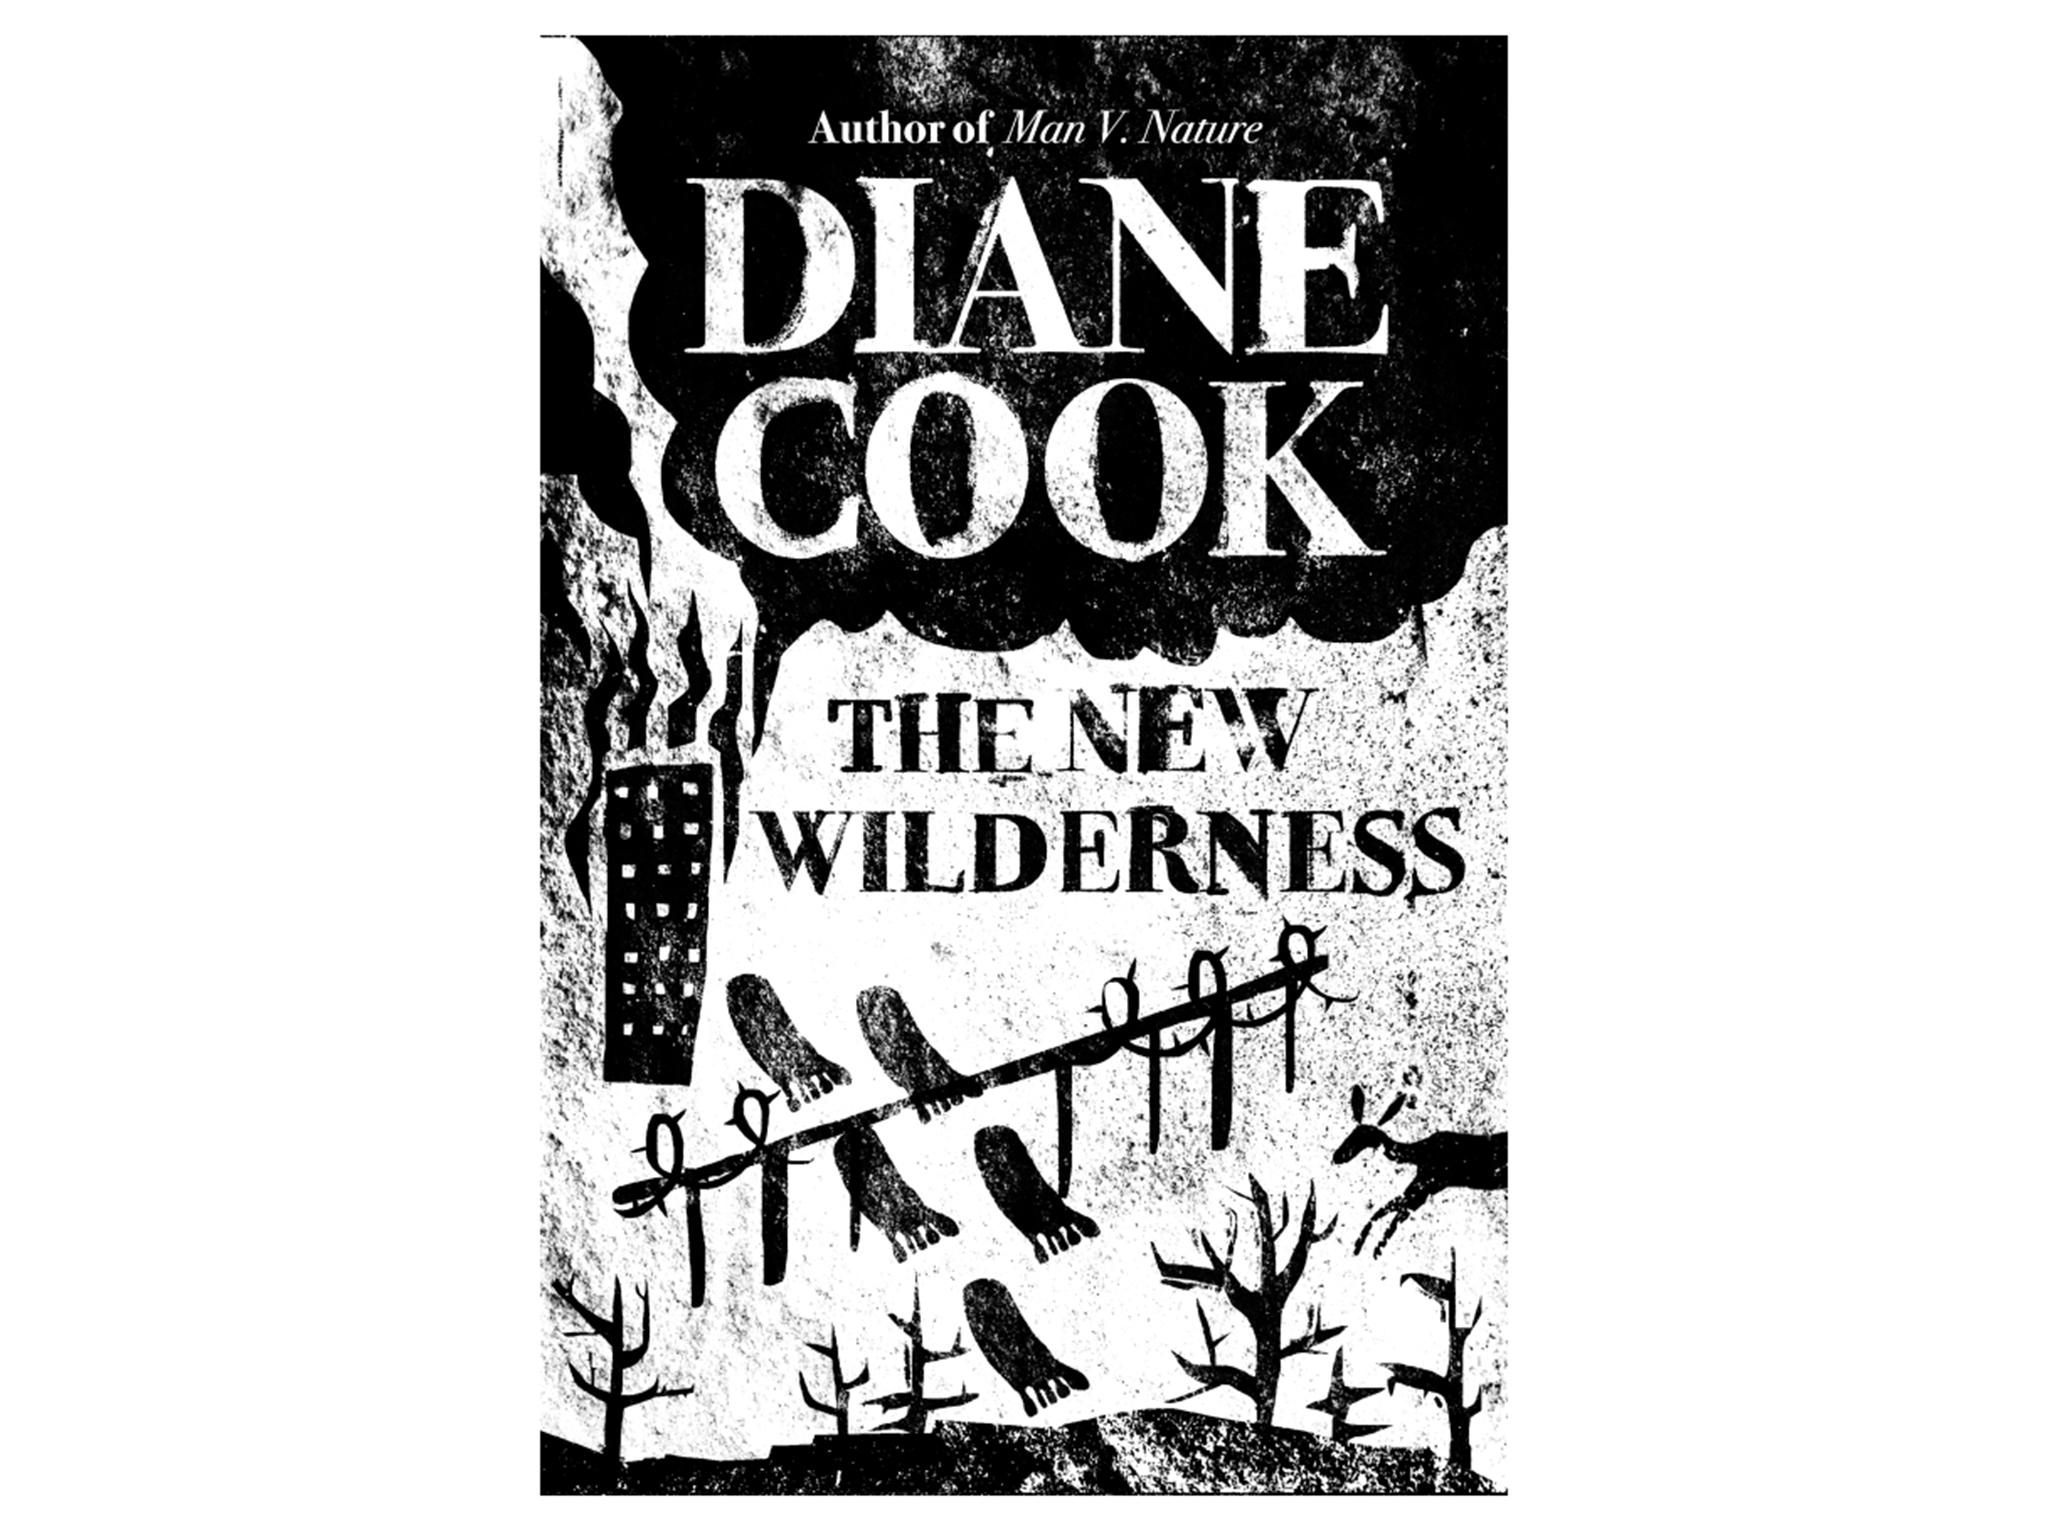 the-new-wilderness-by-diane-cook-man-booker-prize-indybest.jpg